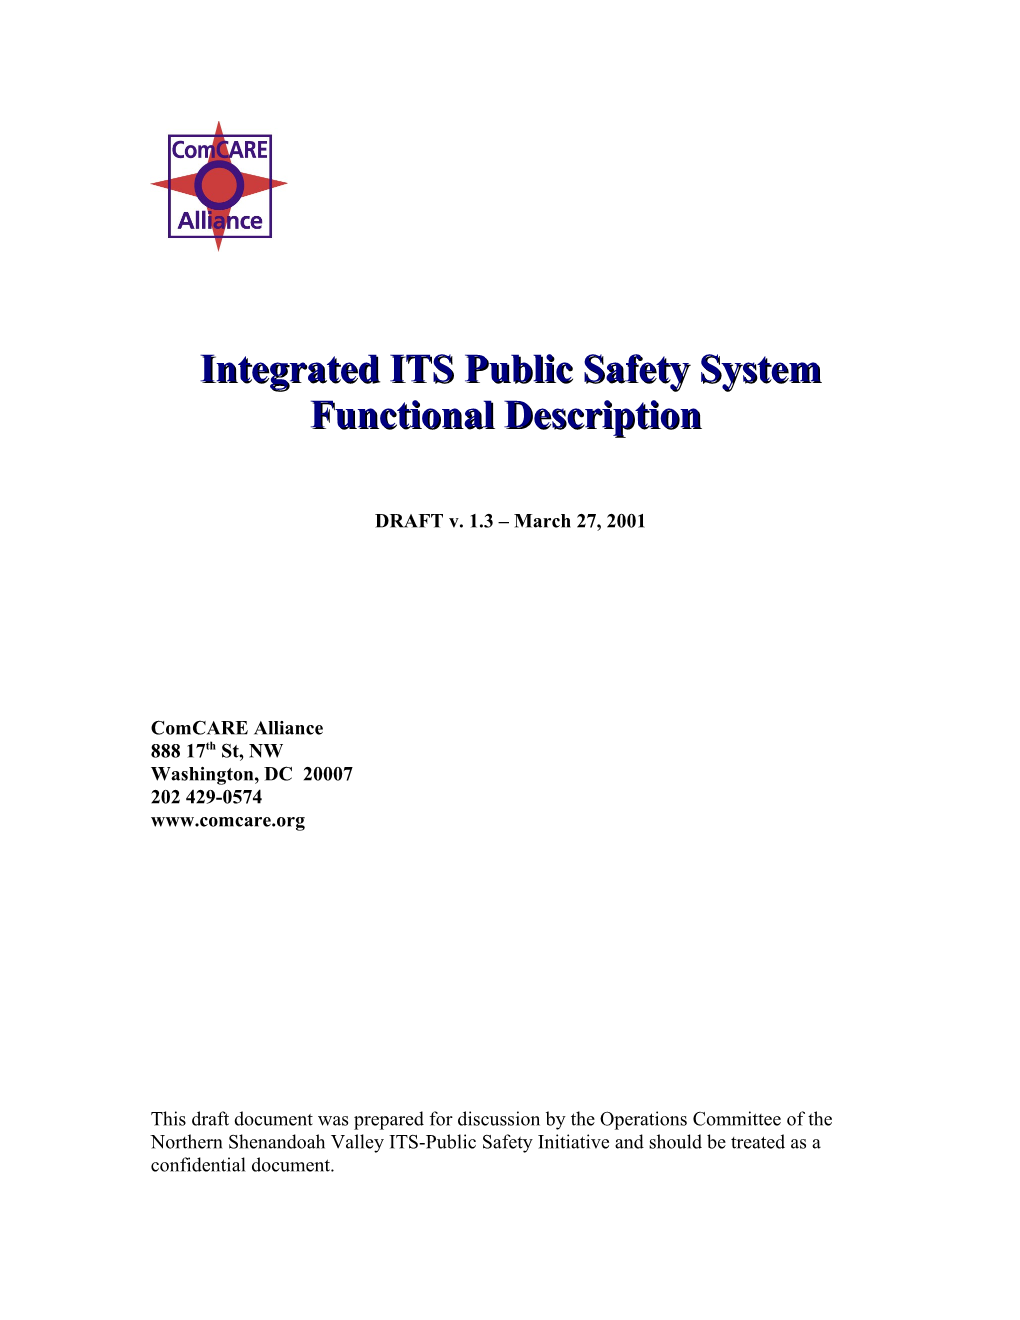 Integrated ITS Public Safety System Functional Description